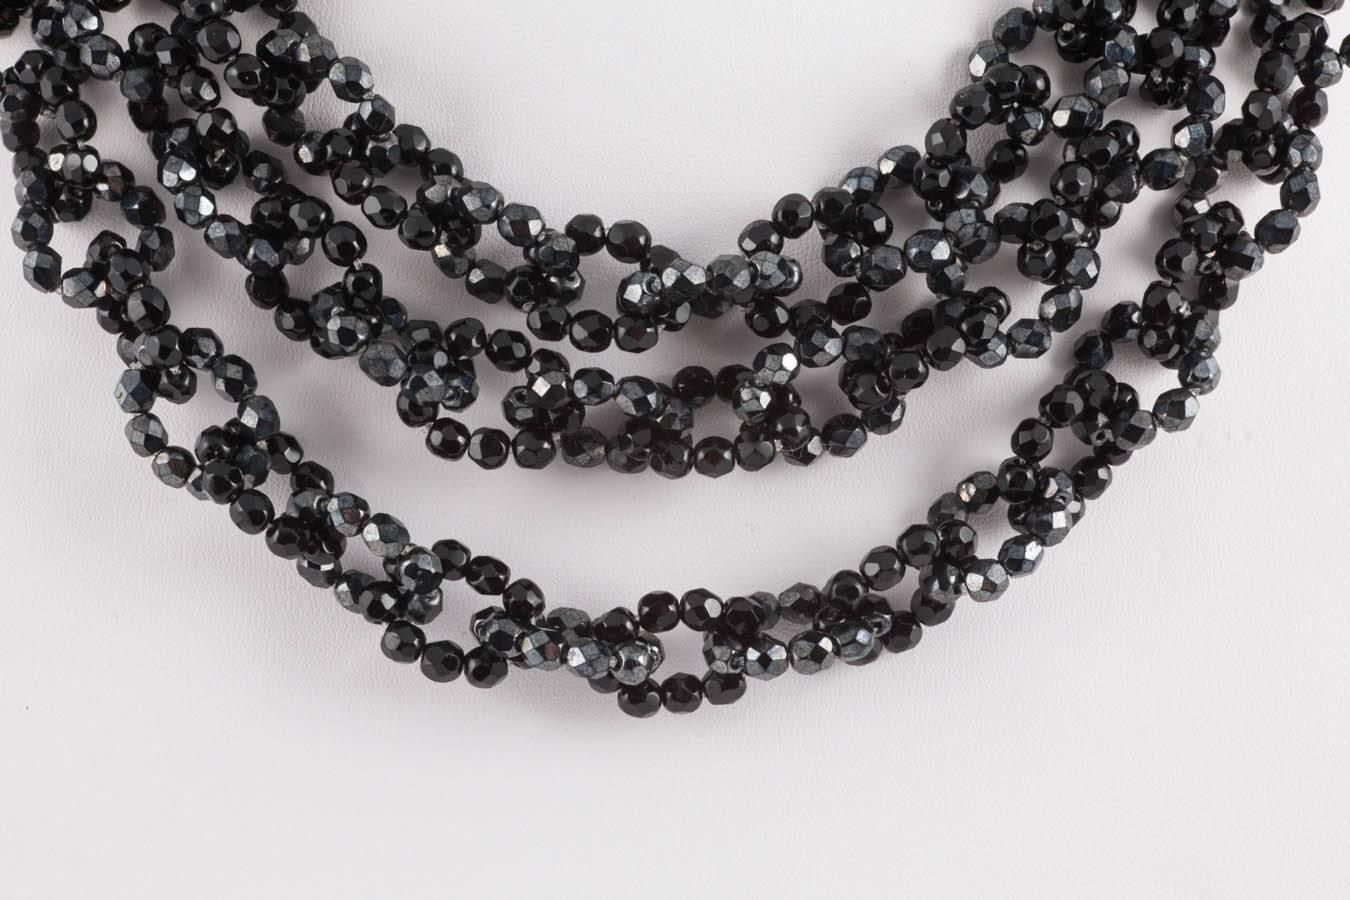 Made from half crystal faceted beads , one loop is of high gloss beads, the next, less glossy, with more of a matt texture, alternating likewise through each row, throughout the whole necklace. This gives the impression of a very subtle colour